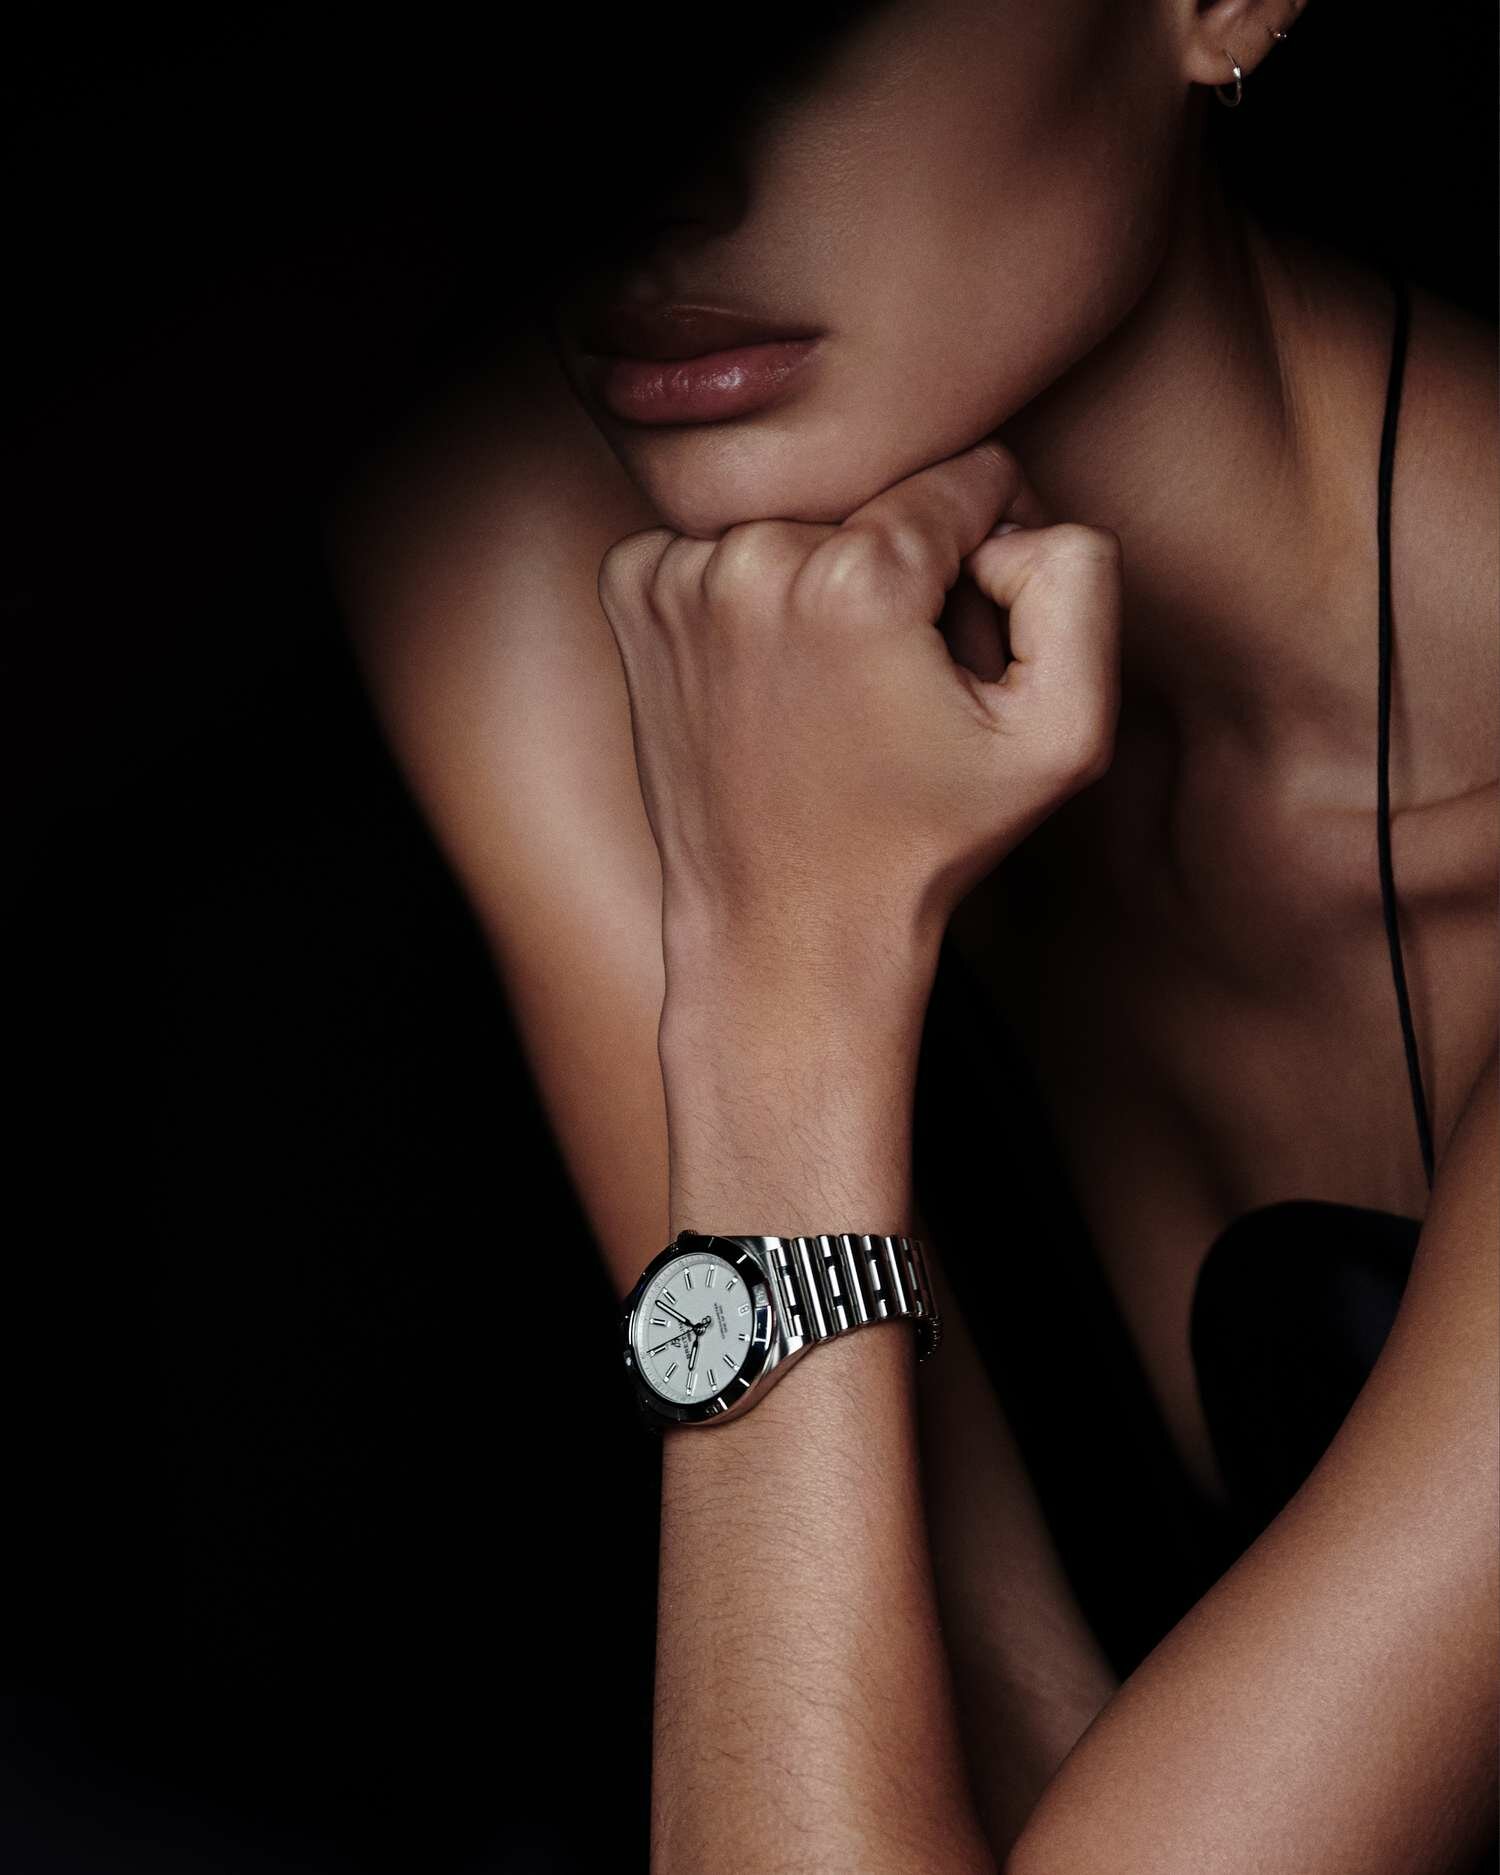 A model wears a watch from the new Breitling x Victoria Beckham campaign.